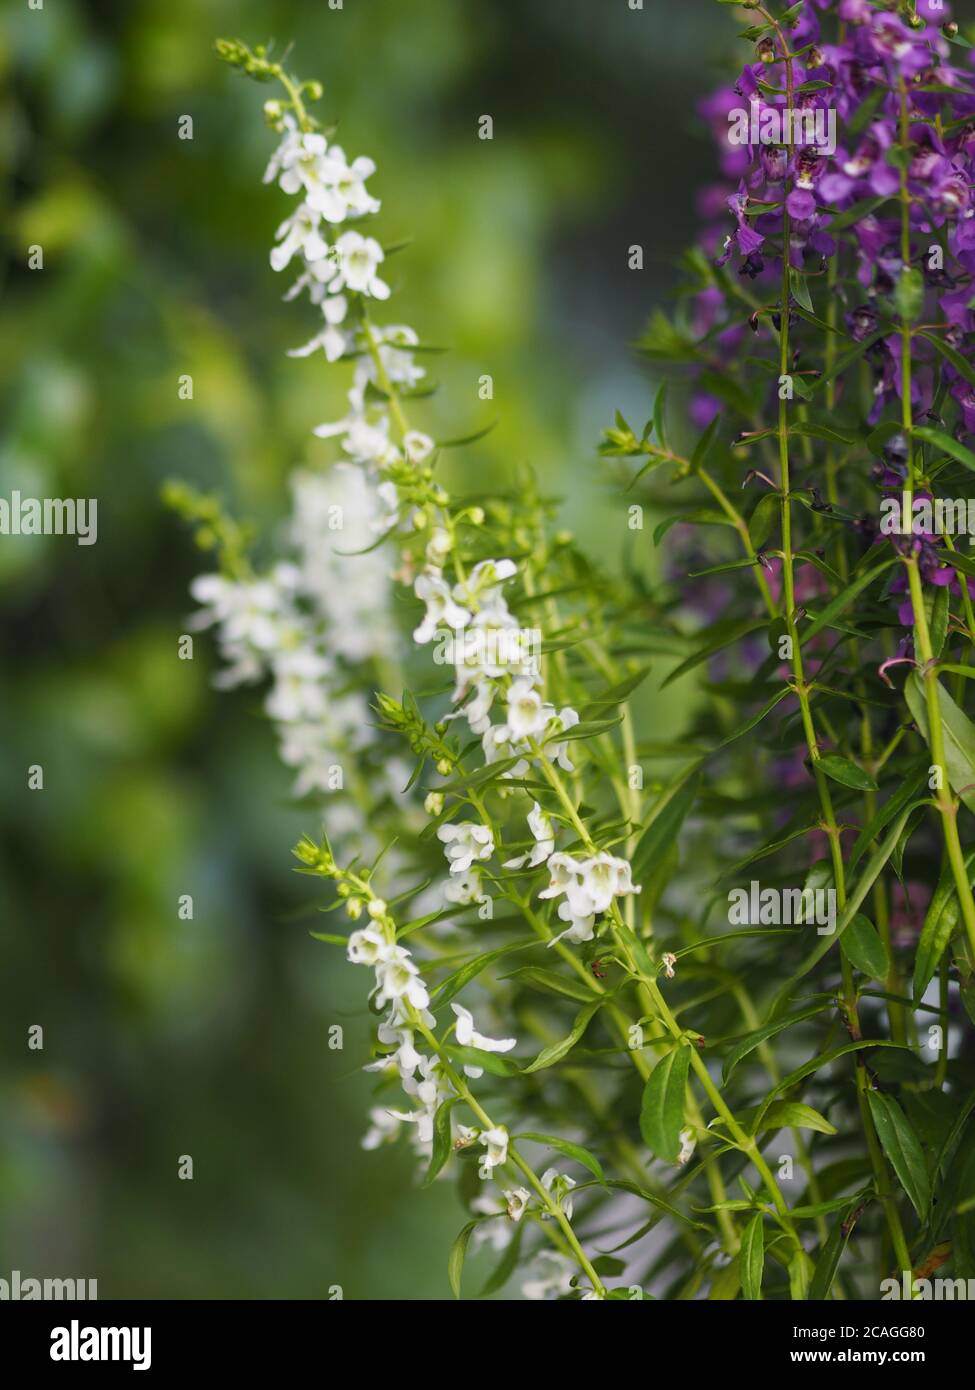 Forget me Not  Angelonia goyazensis Benth, Digitalis solicariifolia name white and purple flower blooming in green plastic pot hanging Stock Photo